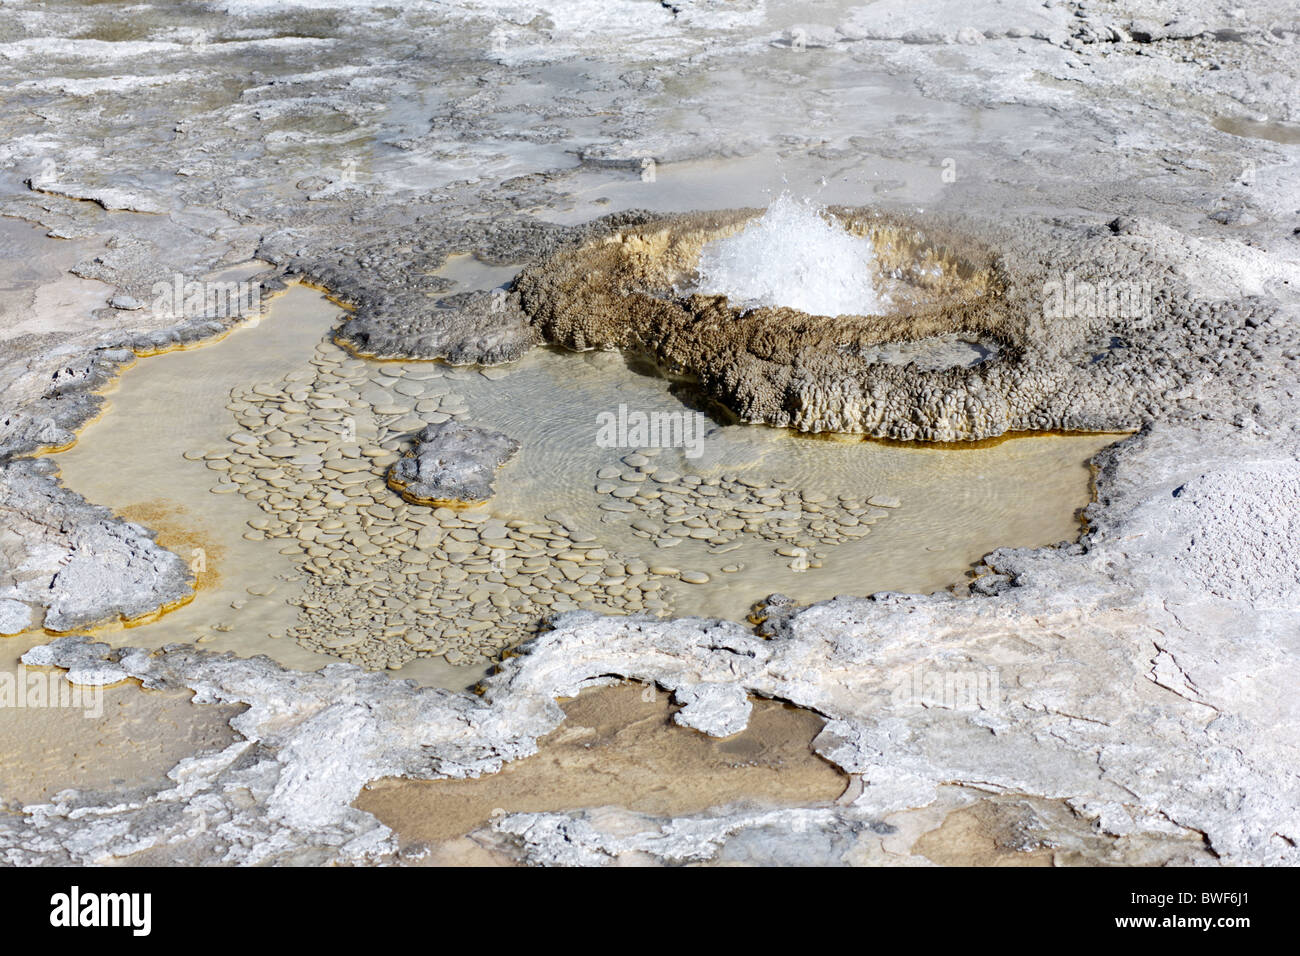 The Aurum Geyser near Old Faithful geyser in Yellowstone National Park in Wyoming, United States  Stock Photo